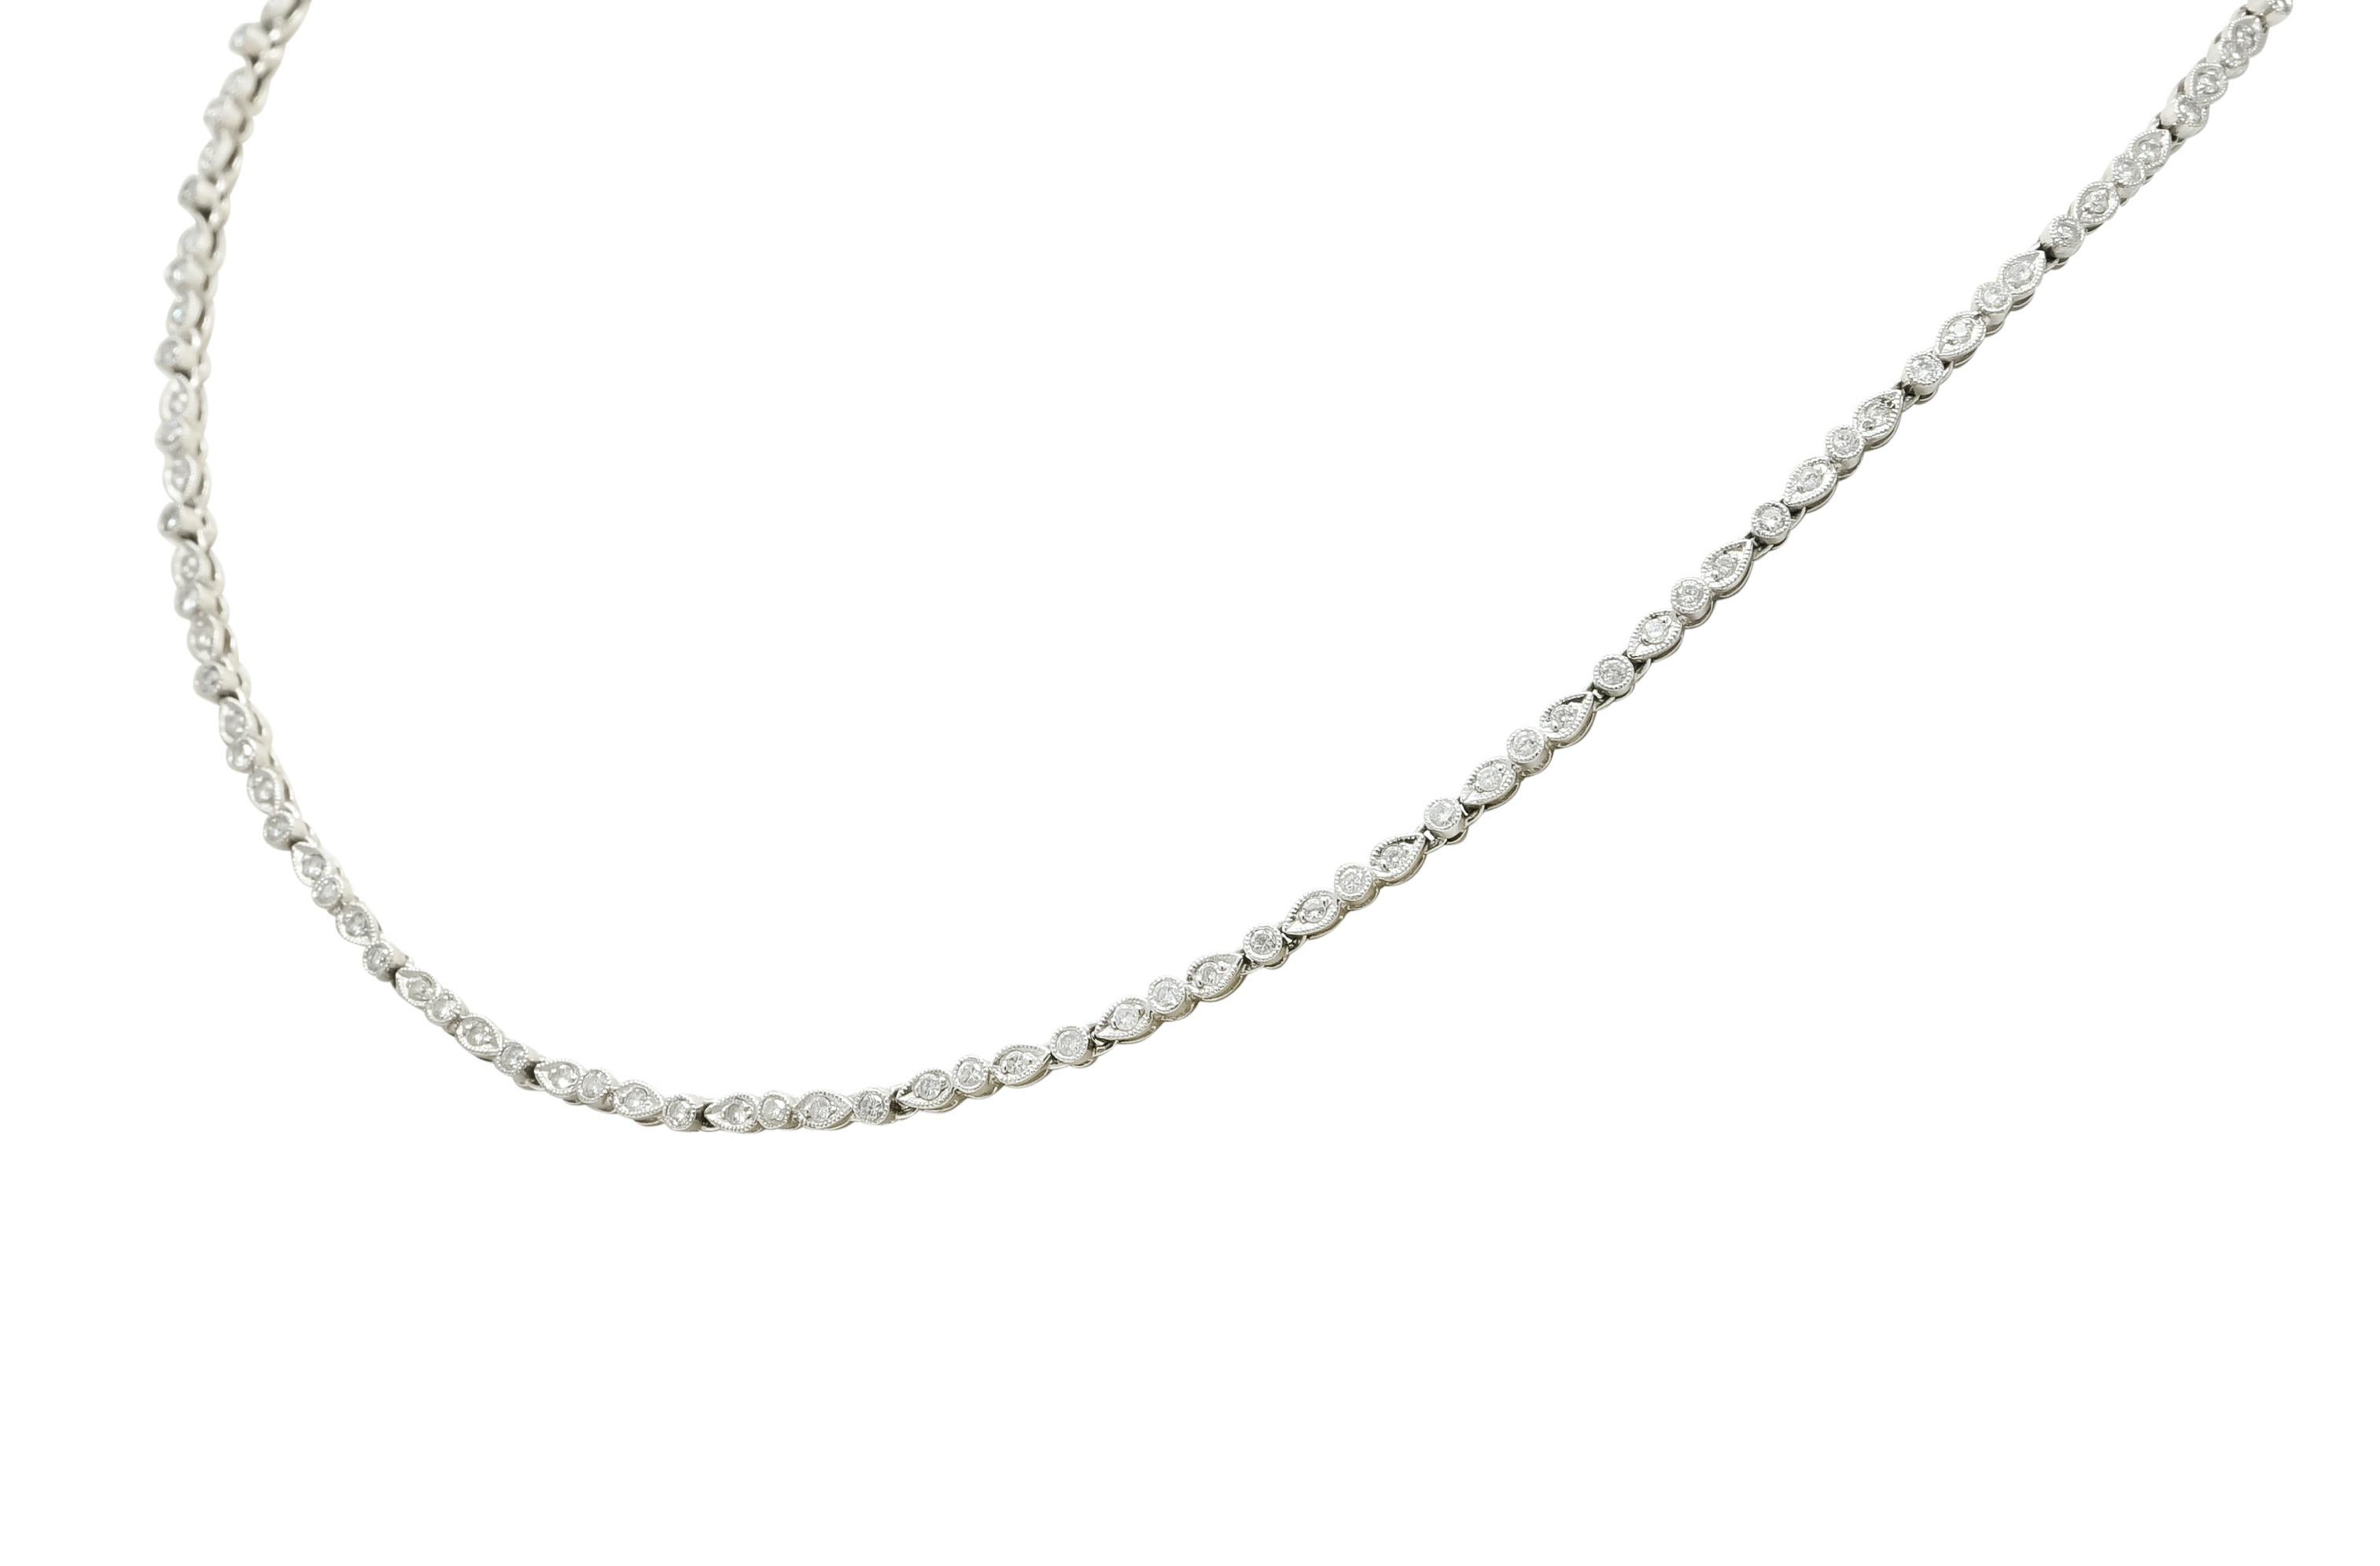 Necklace comprised of bezel set circular links alternating with bead set navette links

Set throughout with round brilliant cut diamonds, weighing approximately 3.05 carats total, G to I color and SI to I clarity

Completed by delicate millegrain